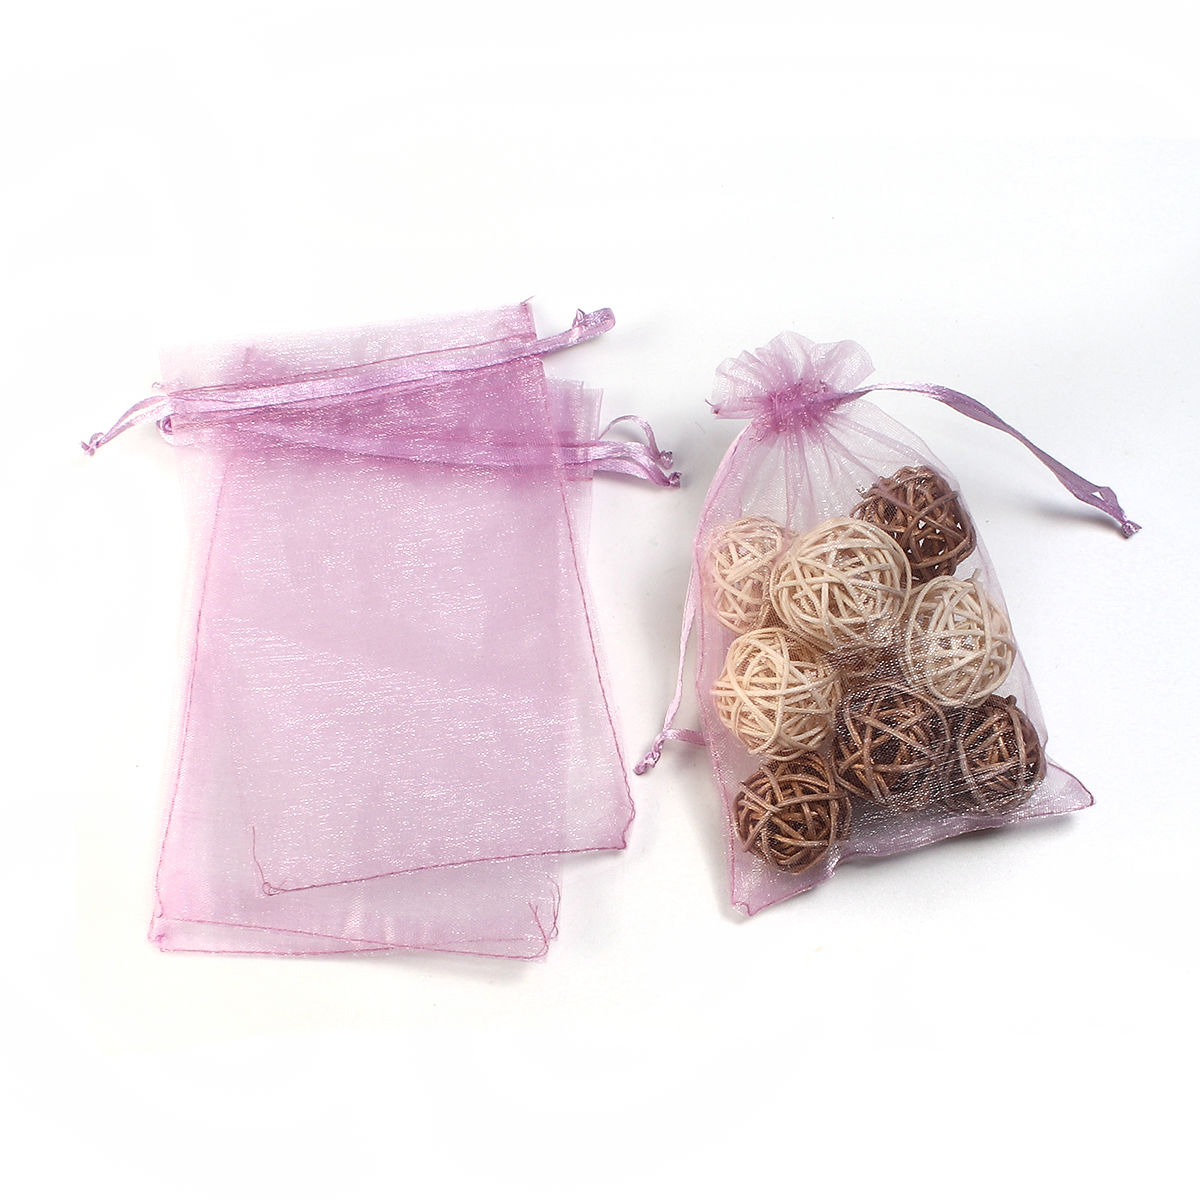 Picture of Wedding Gift Organza Jewelry Bags Drawstring Rectangle Mauve (Usable Space: 13x10cm) 15cm(5 7/8") x 10cm(3 7/8"), 20 PCs